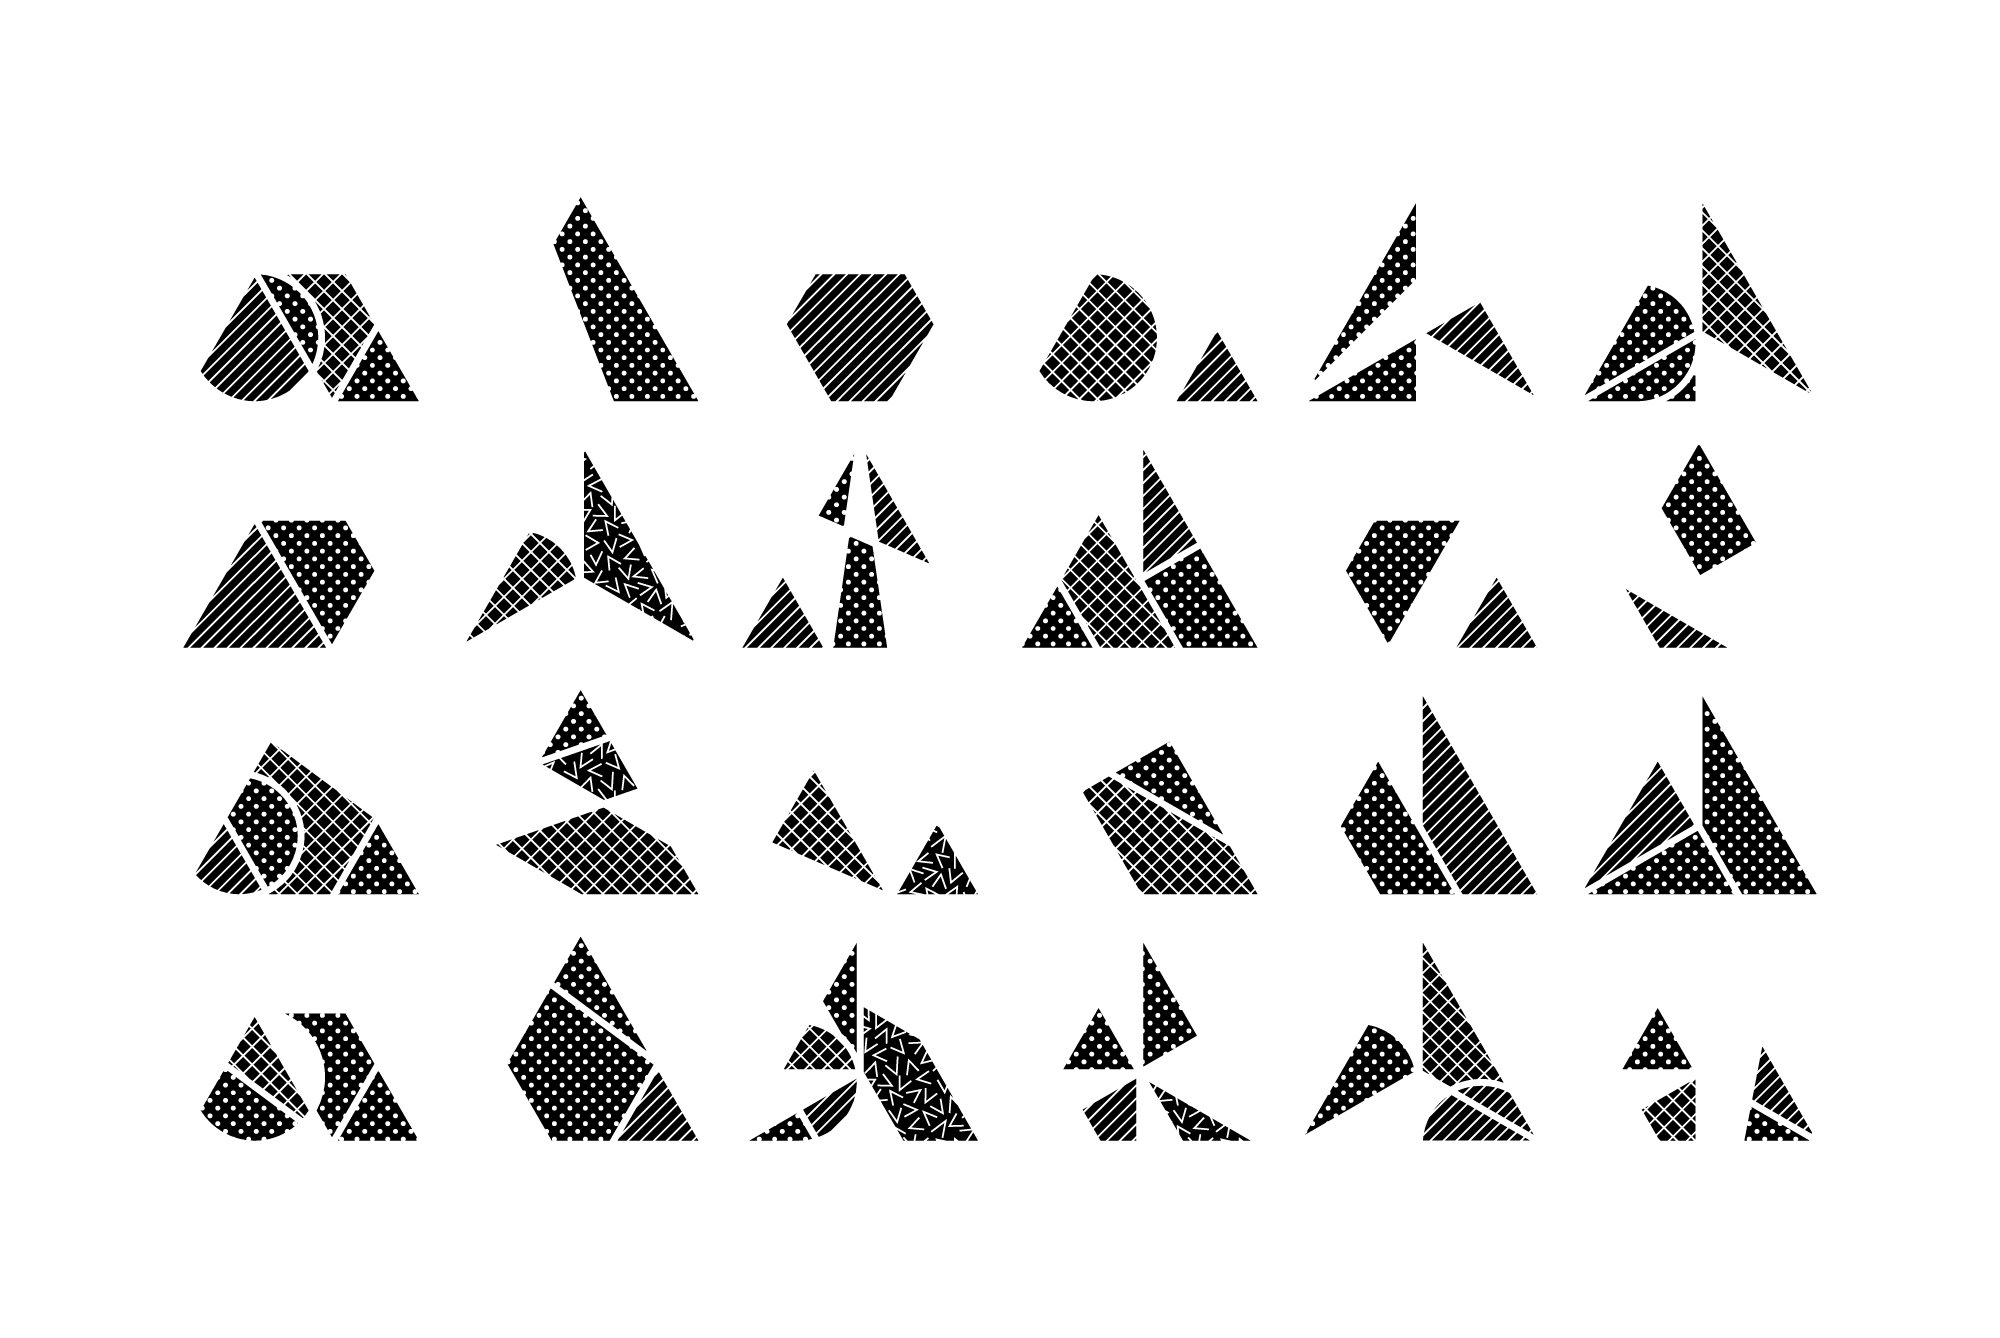 Black triangles shapes.